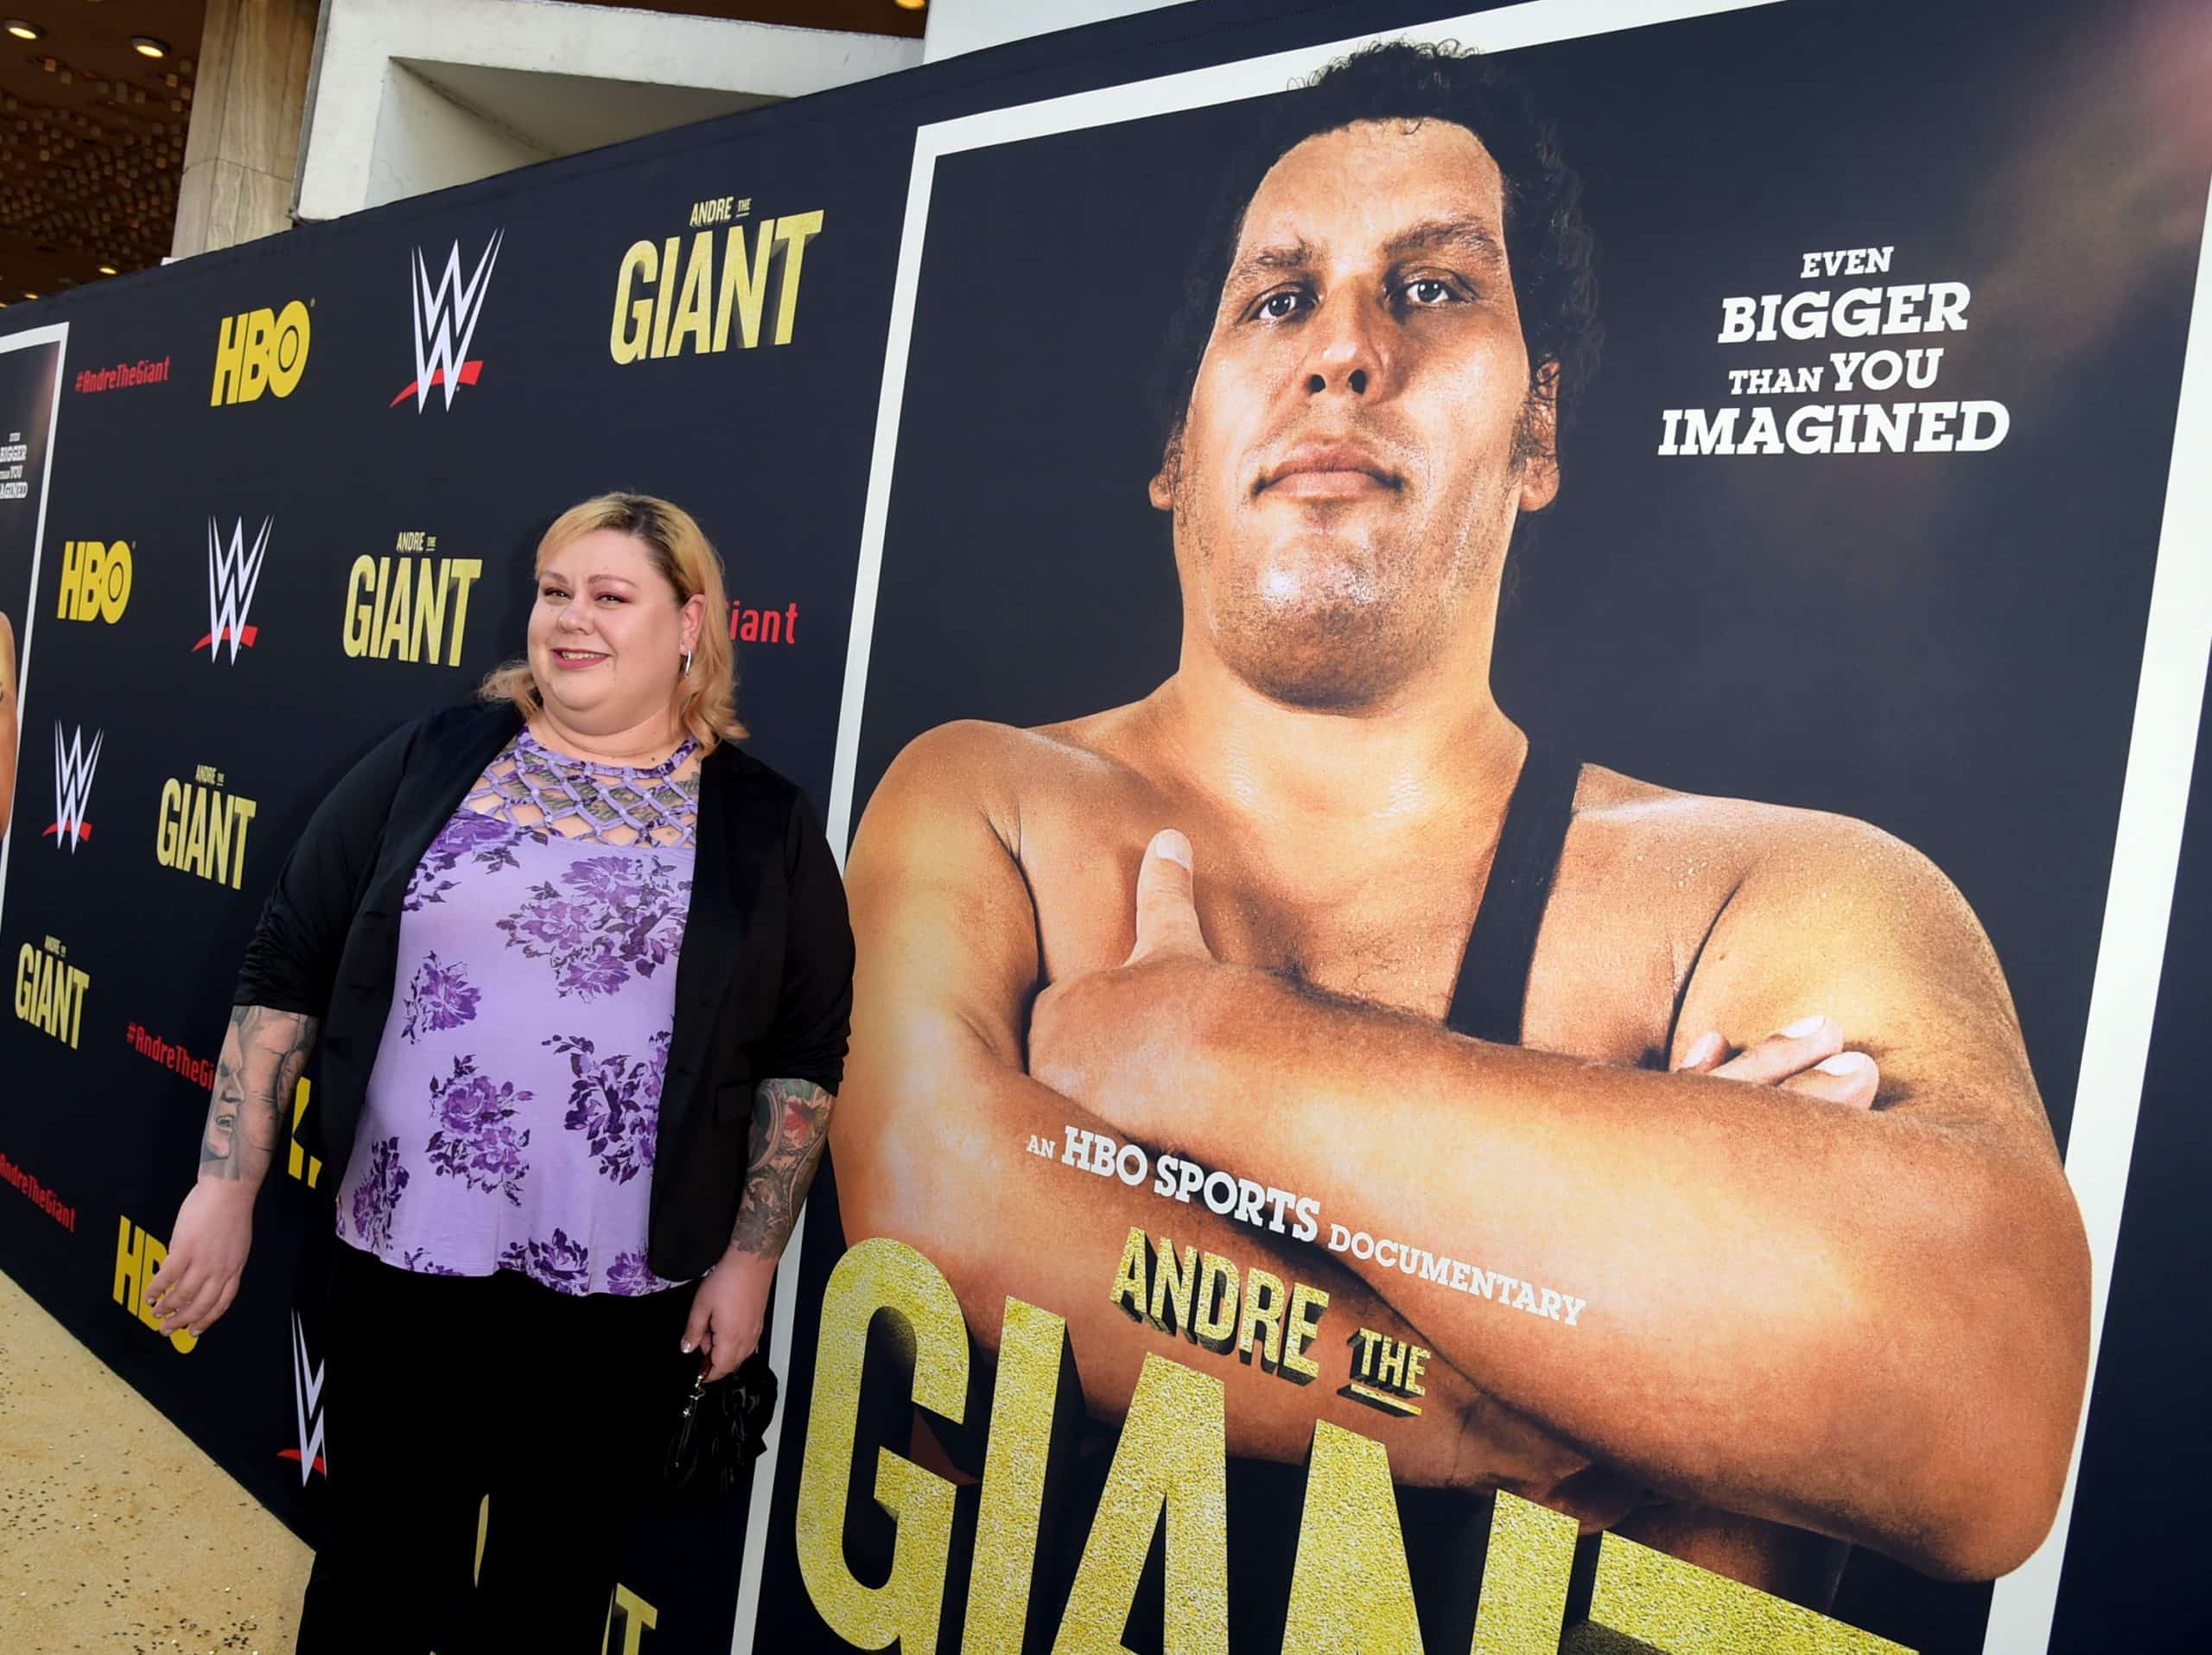 Premiere Of HBO's "Andre The Giant" - Red Carpet